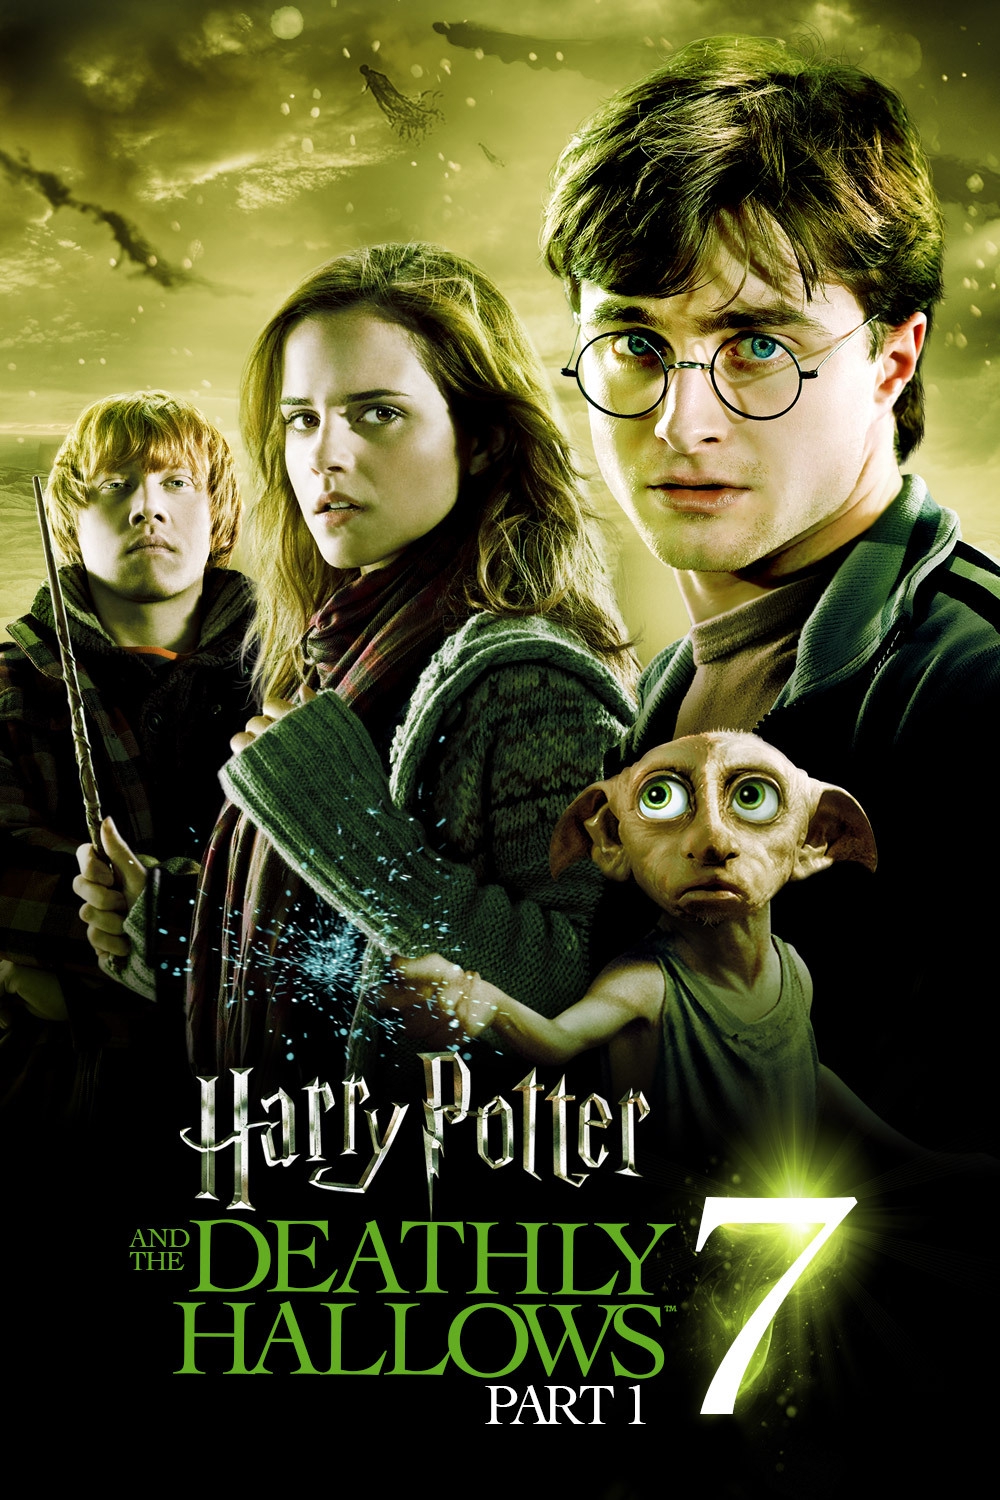 harry potter and the deathly hallows – part 1 watch online